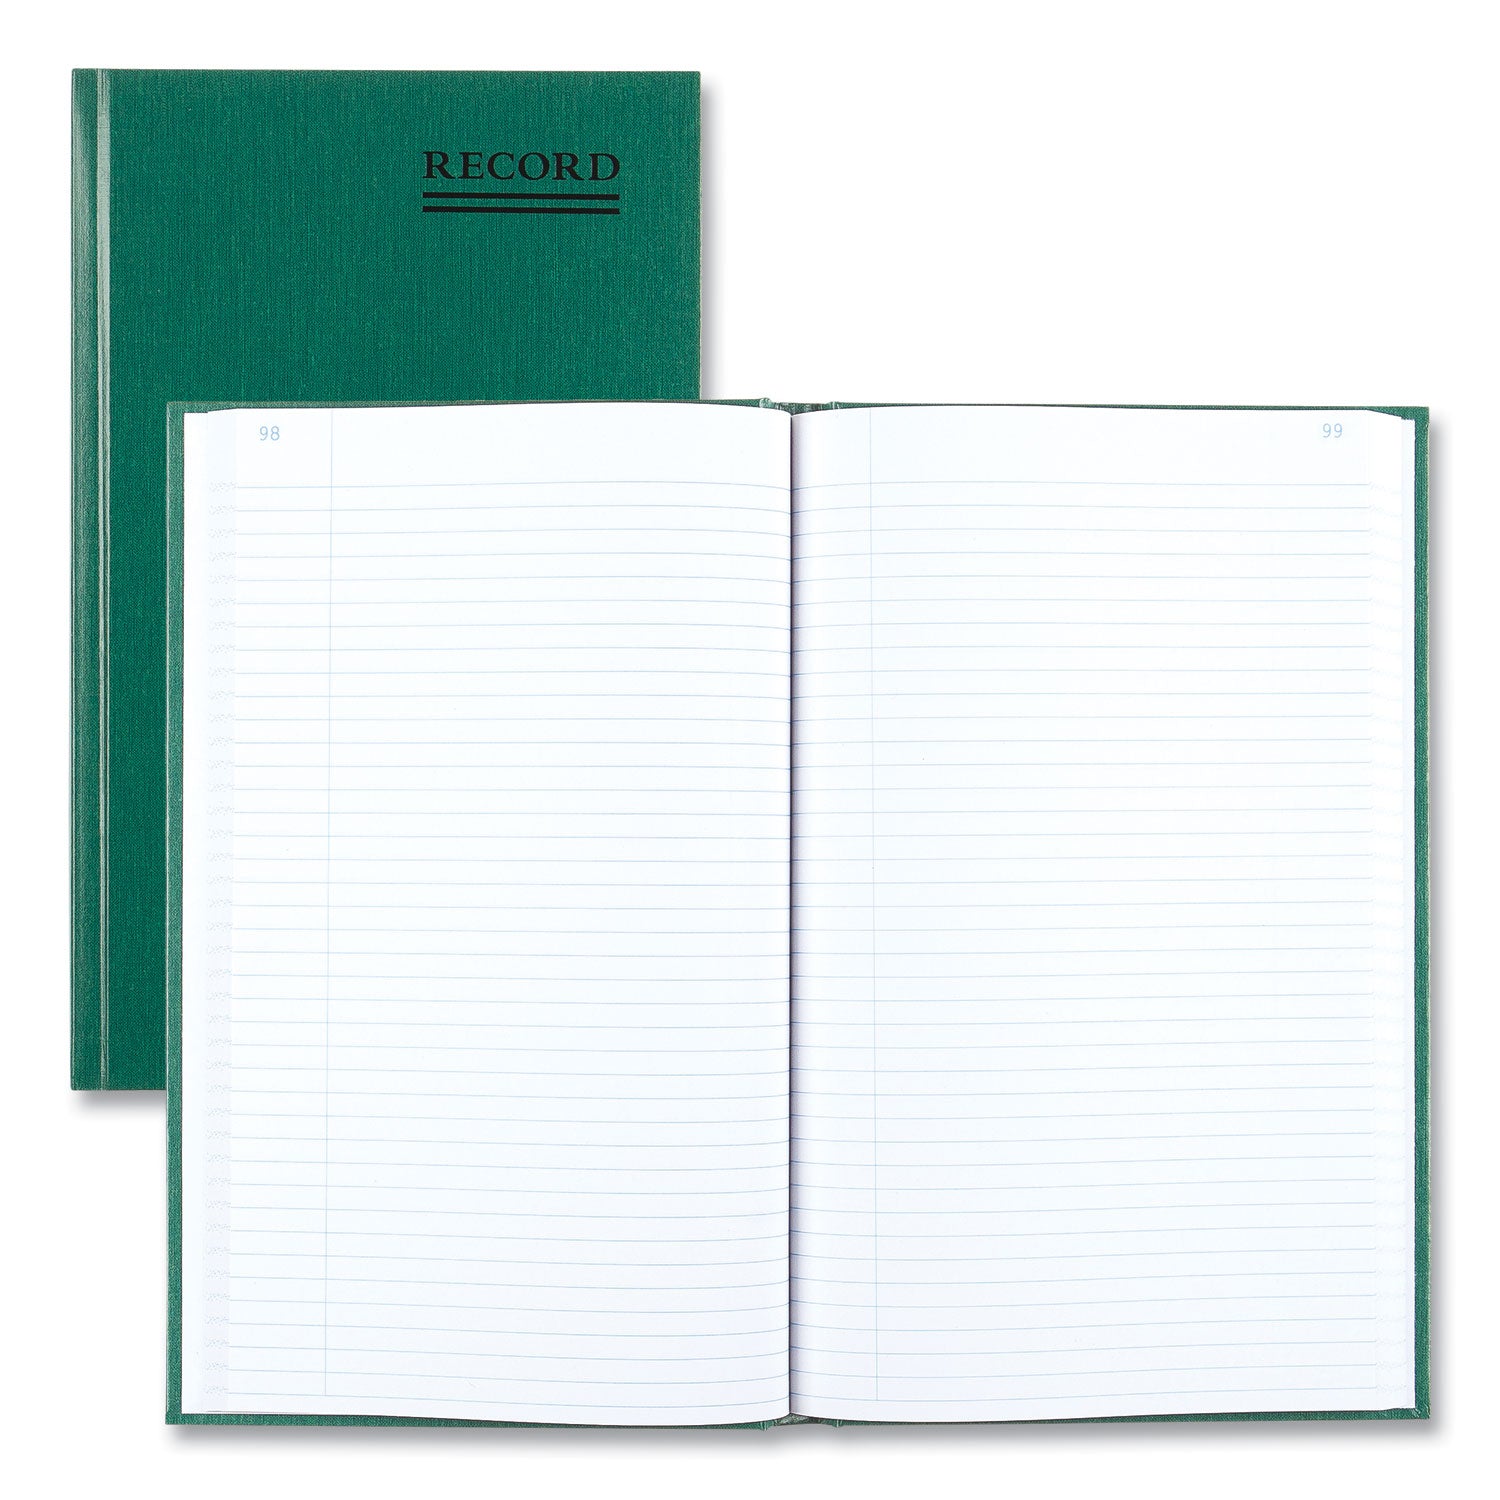 Emerald Series Account Book, Green Cover, 12.25 x 7.25 Sheets, 300 Sheets/Book - 